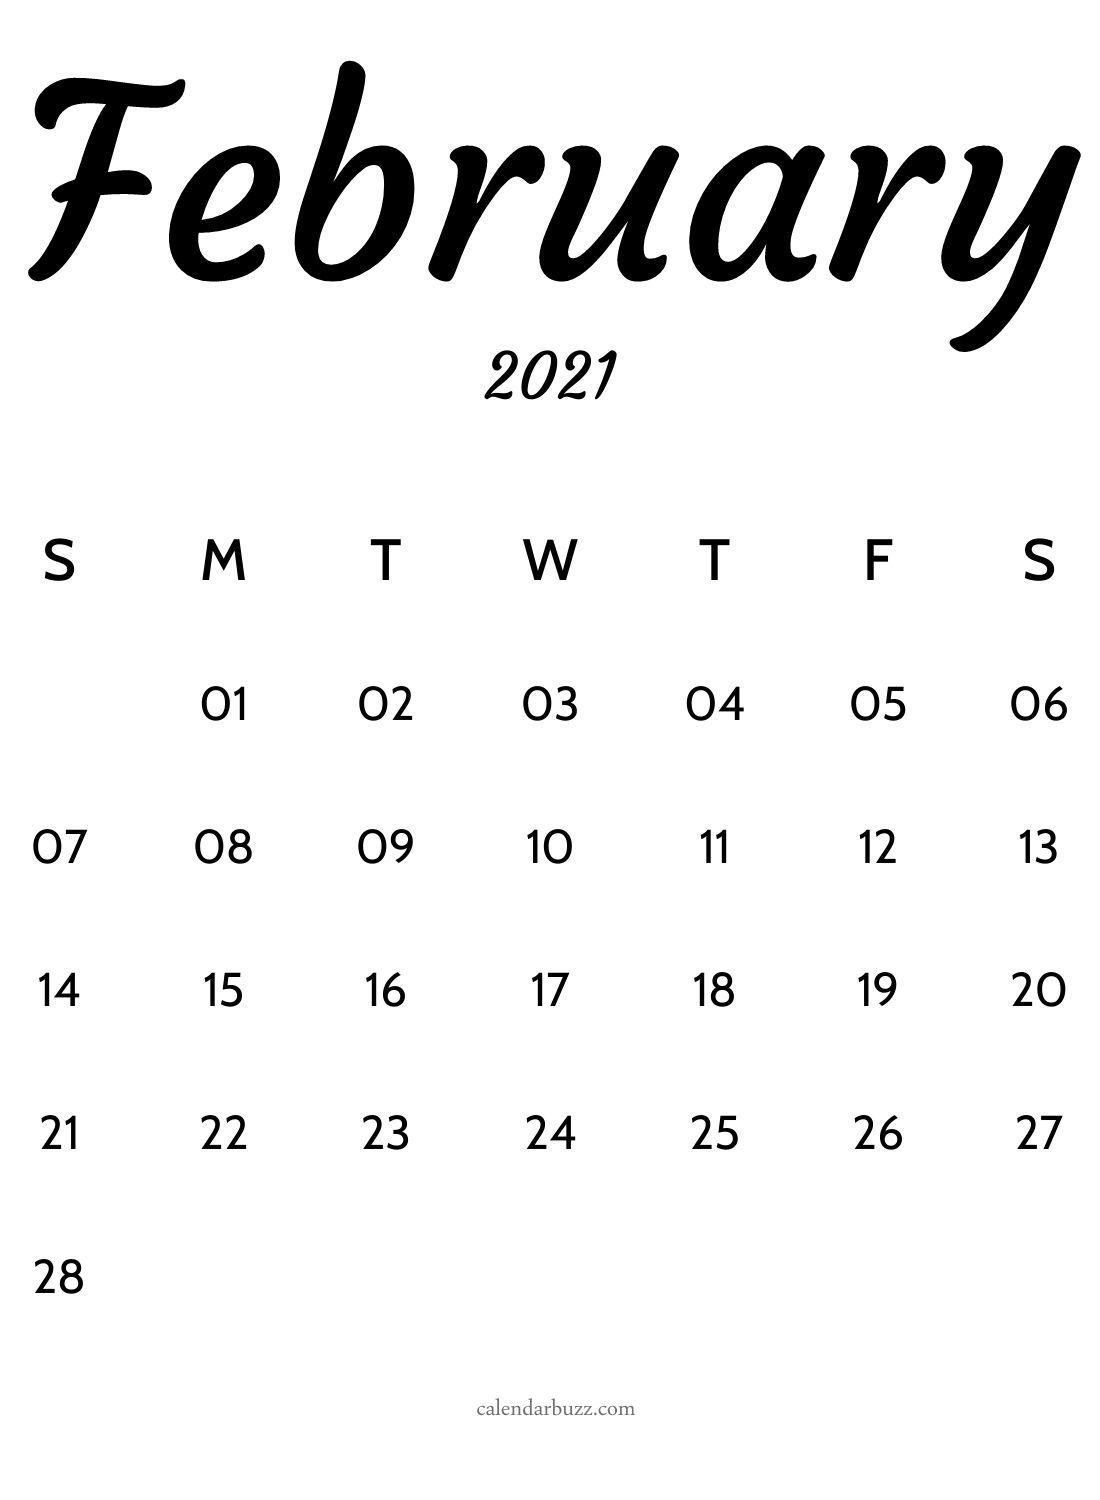 February 2021 Calligraphy Hand Written Calendar | Calligraphy Calendar with regard to Printable Month Calligraphy Clander